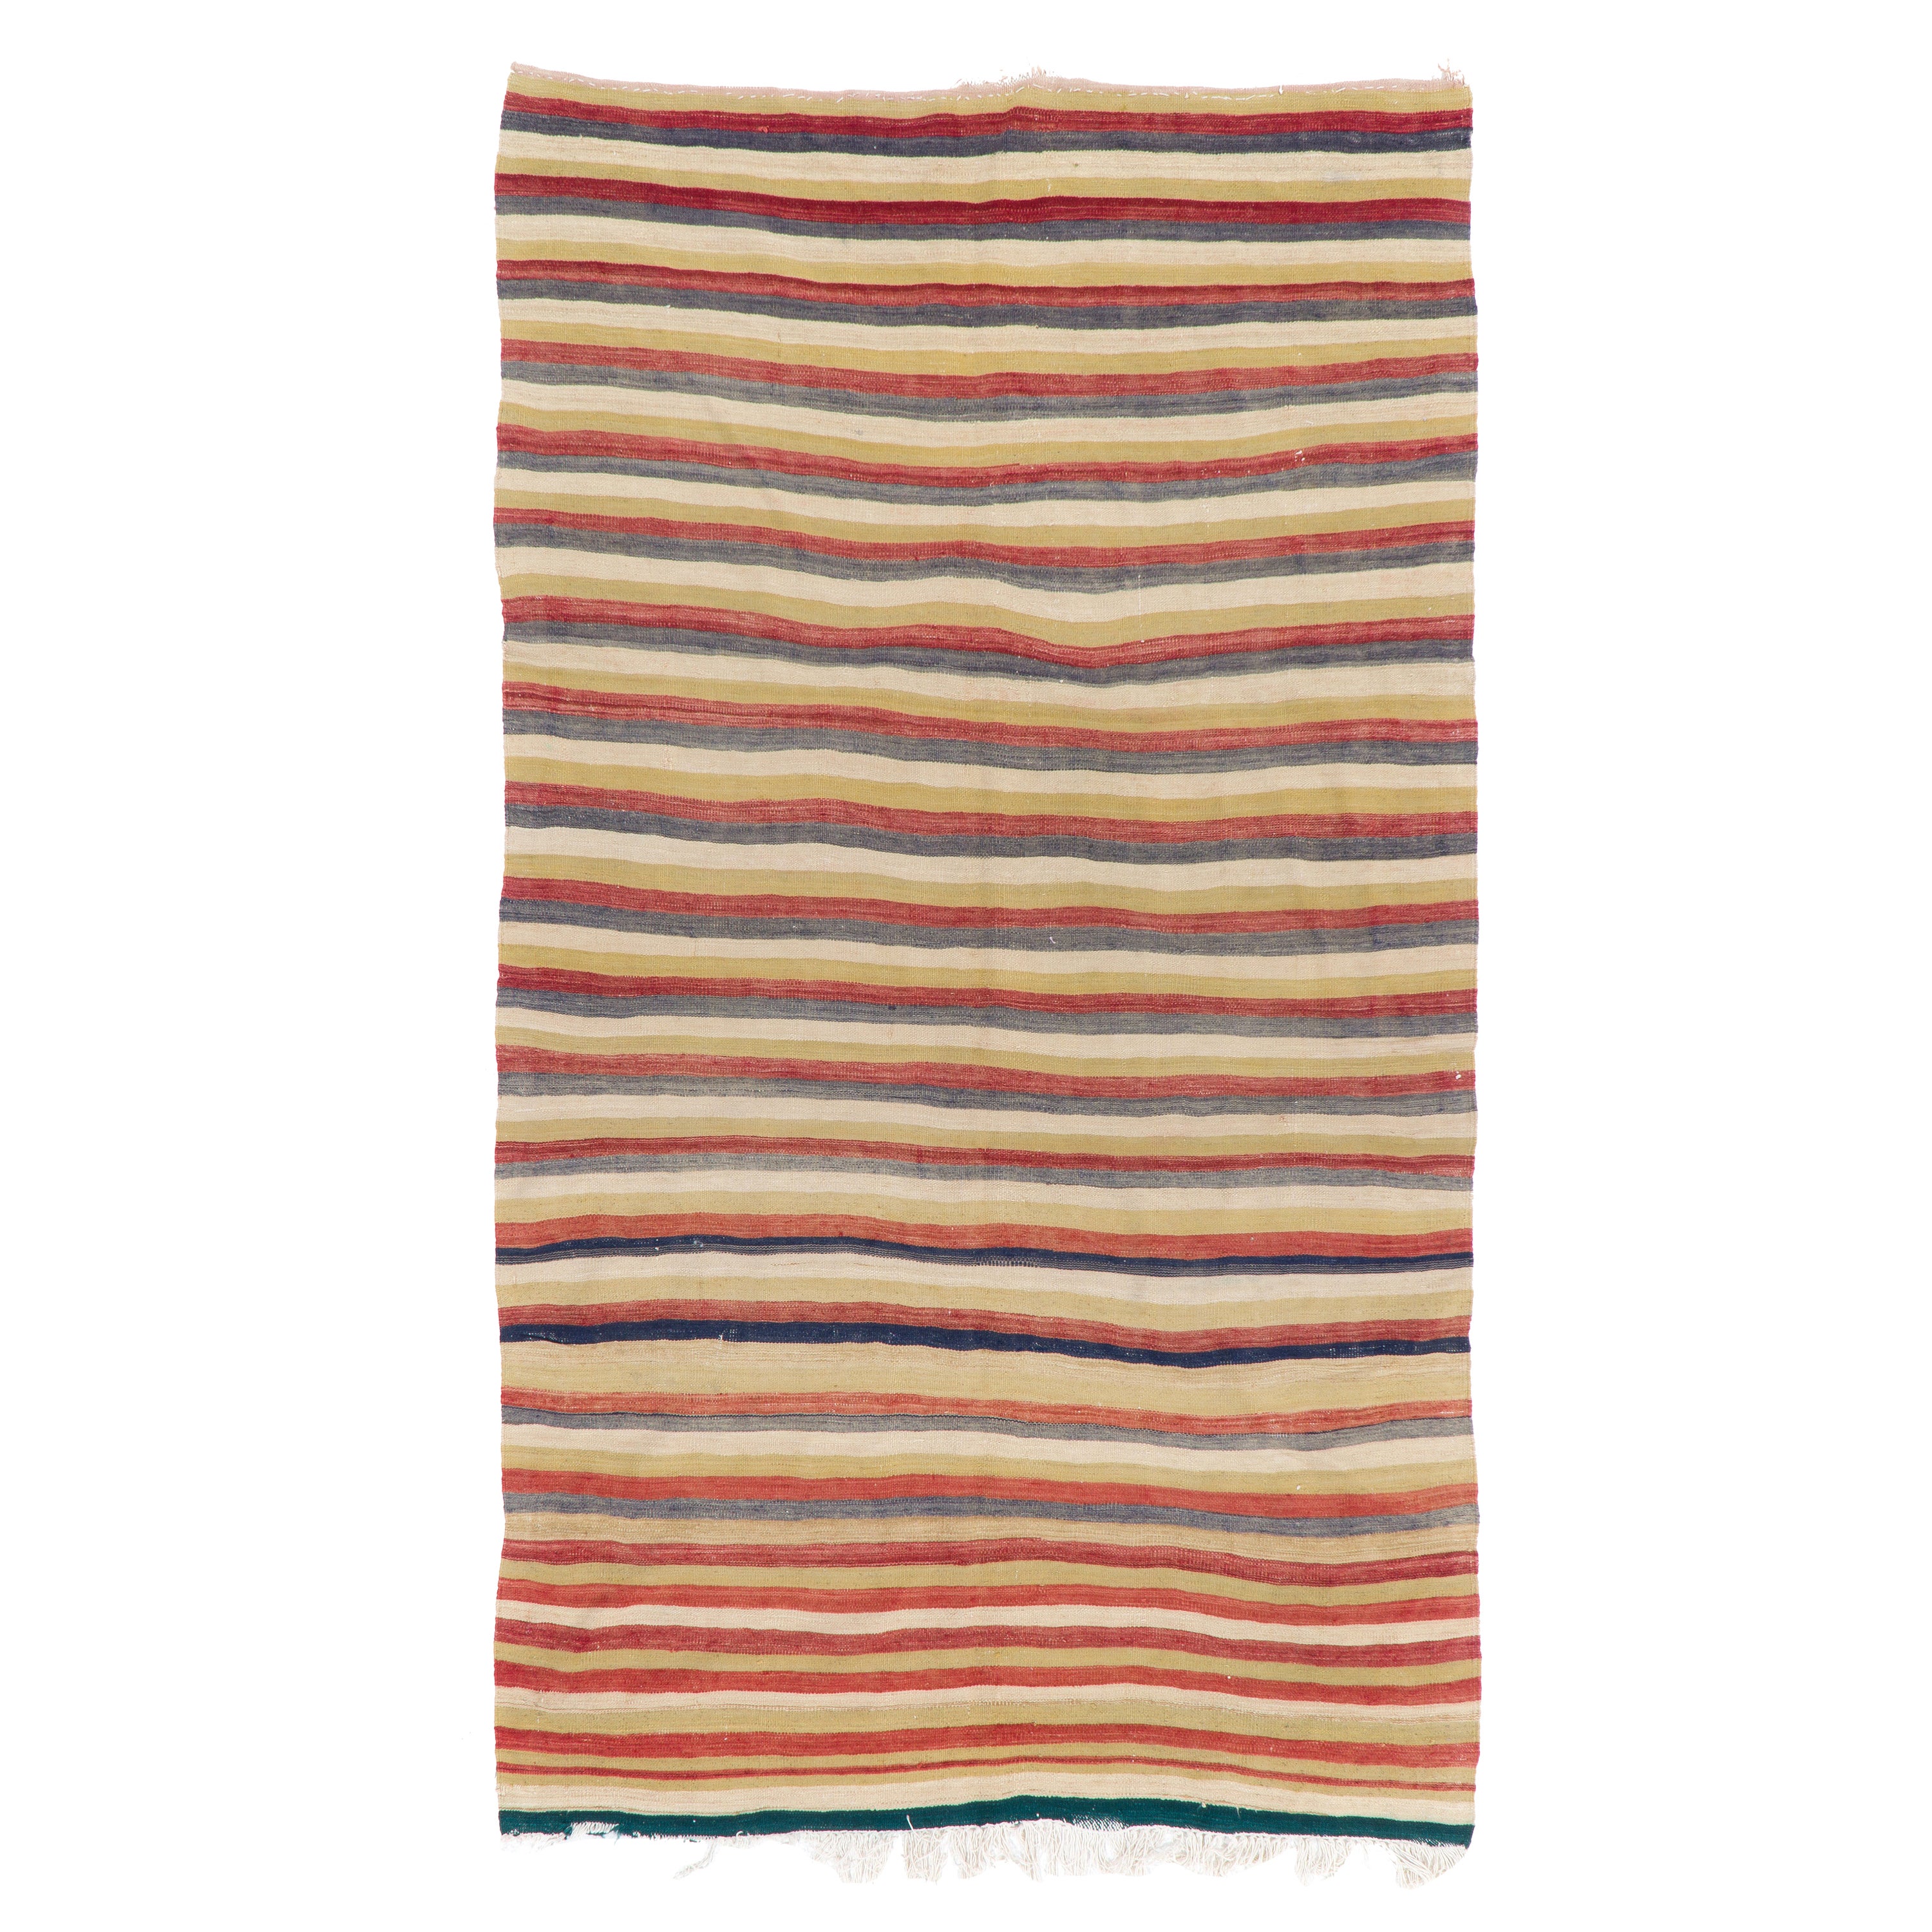 5x8.4 Ft Hand-Woven Vintage Turkish Kilim Rug 'Flat Weave' with Striped Design For Sale